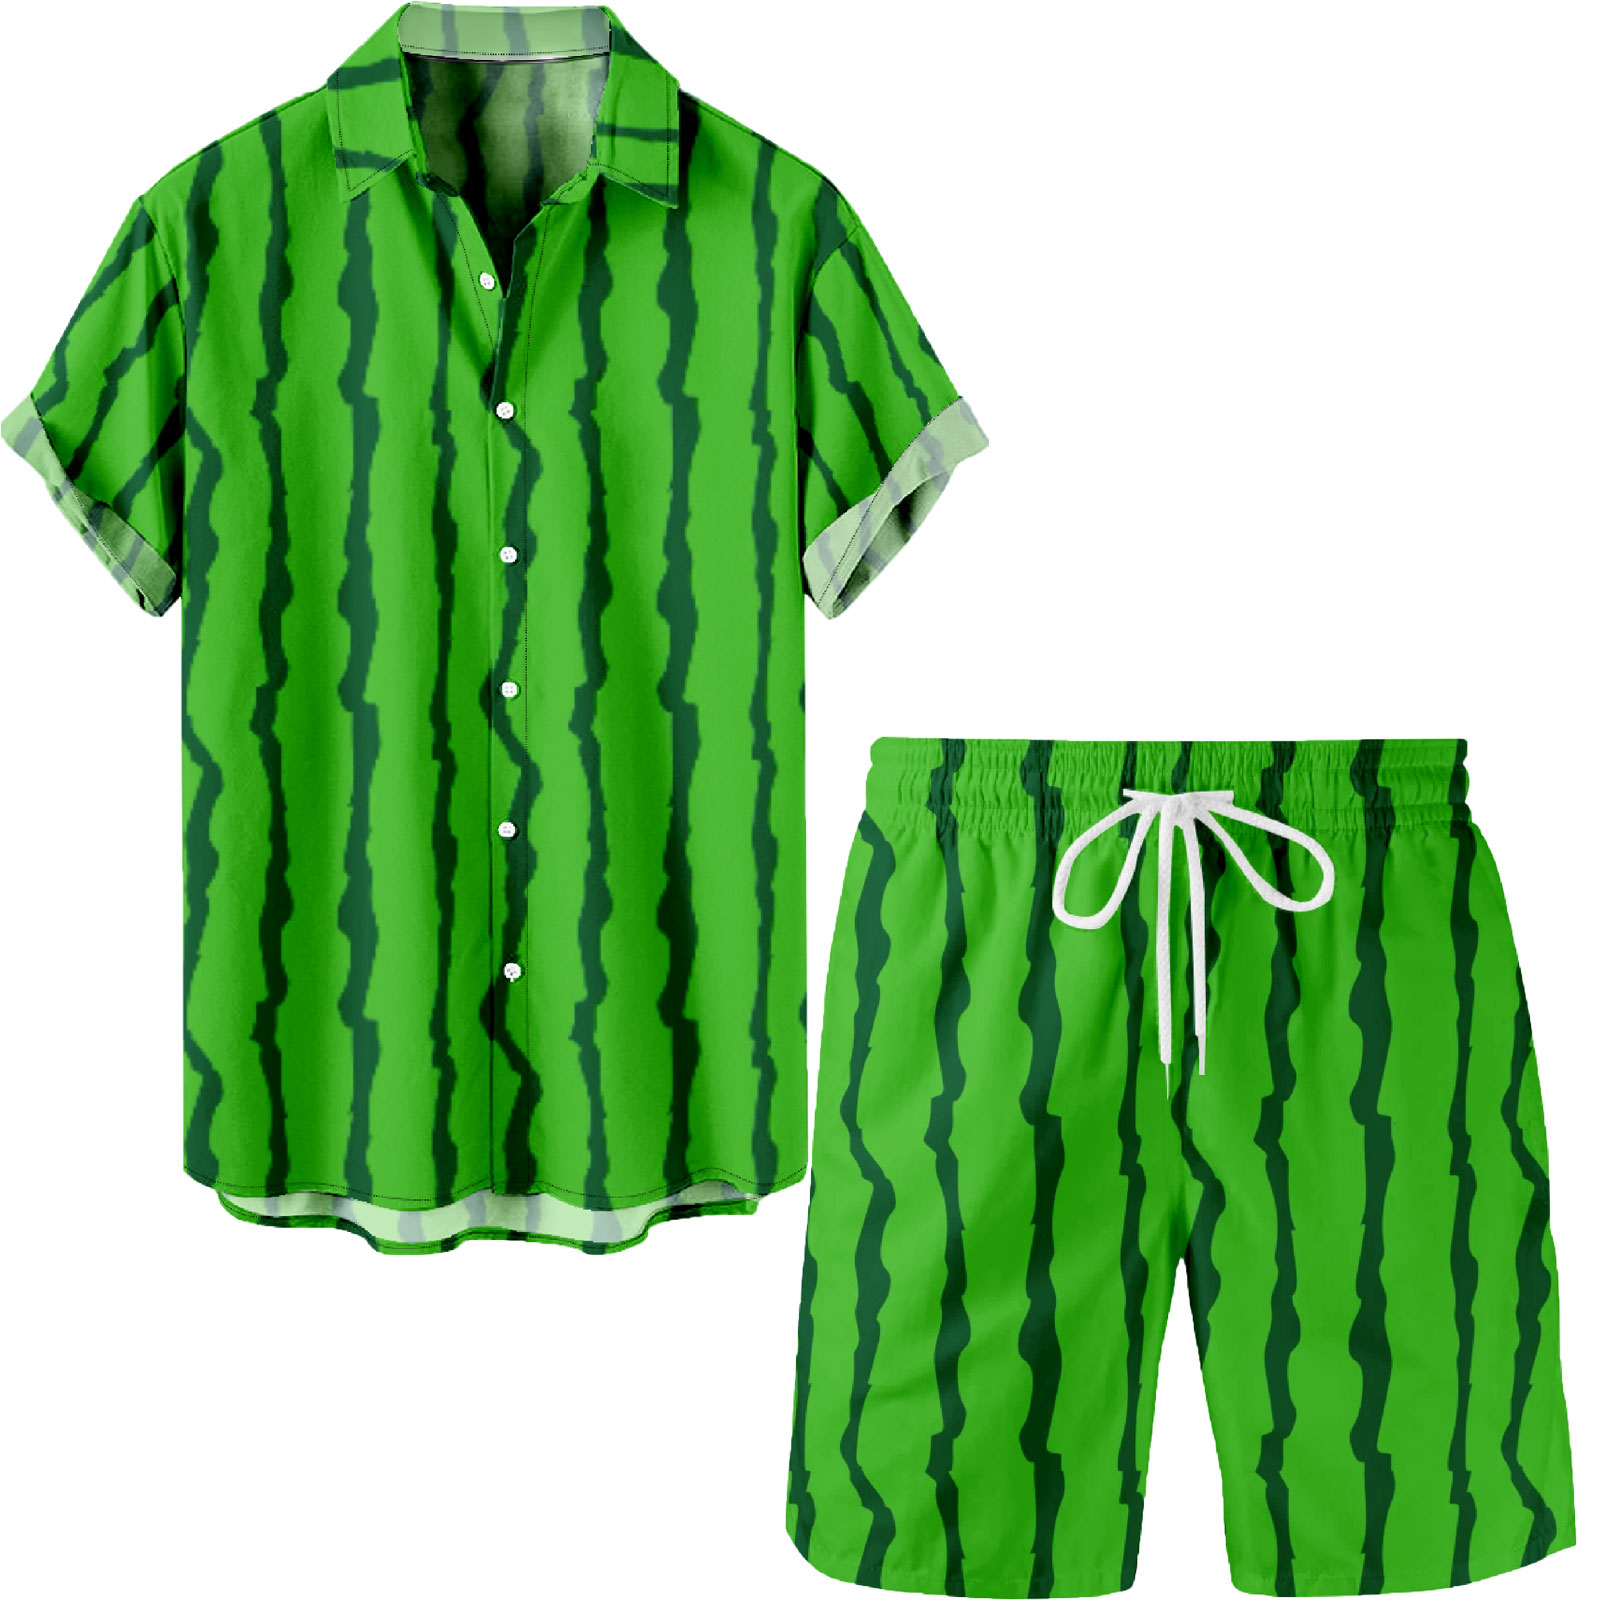 Green Striped Watermelon Button Up Shirt and Beach Shorts Summer 2 Pieces Suit